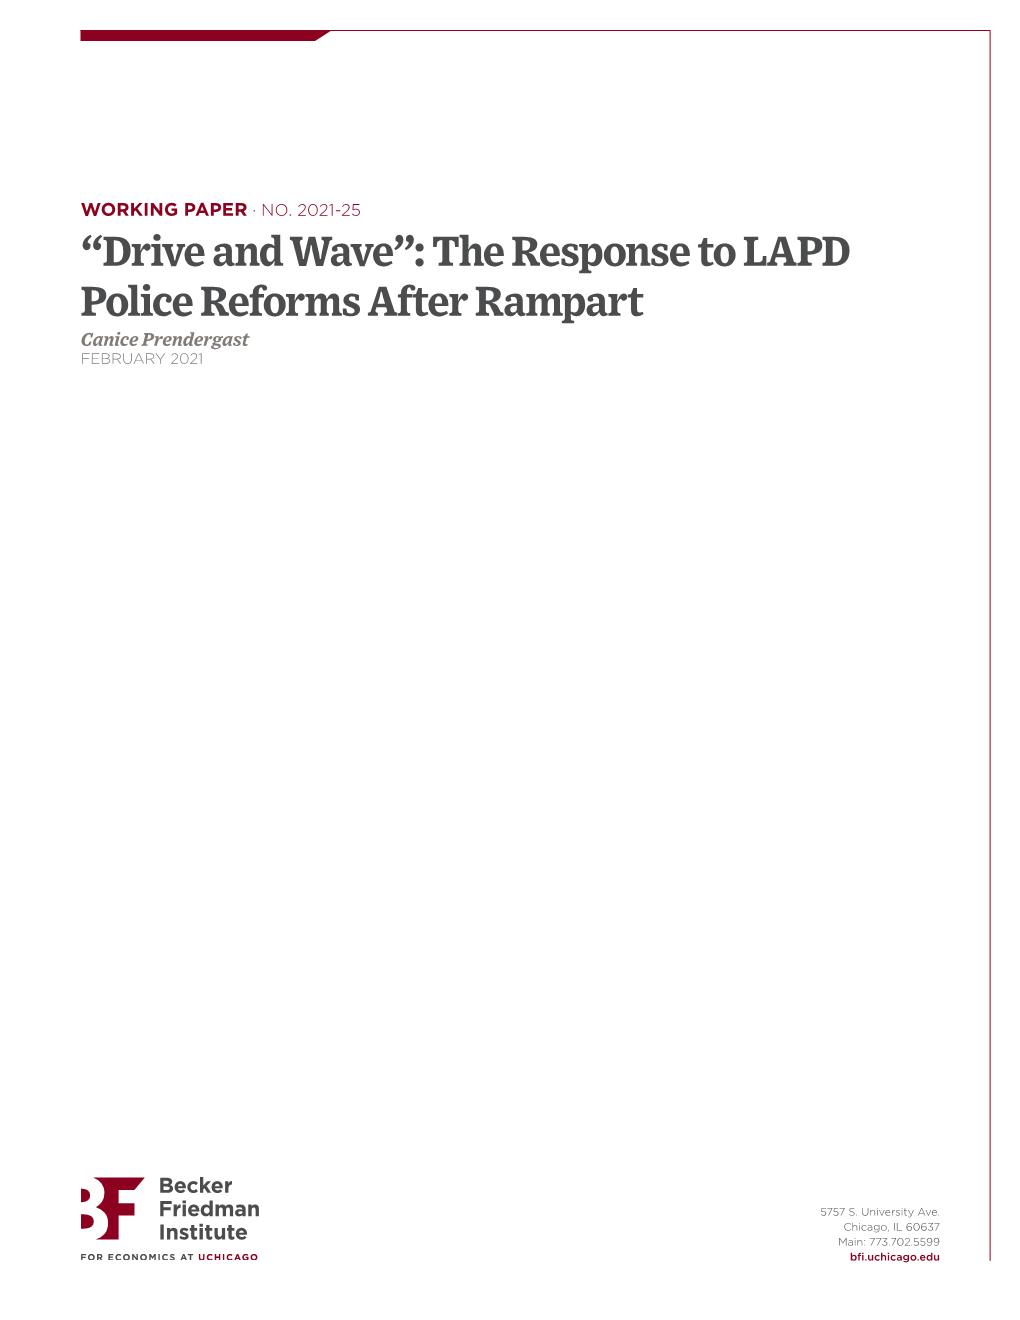 “Drive and Wave”: the Response to LAPD Police Reforms After Rampart Canice Prendergast FEBRUARY 2021